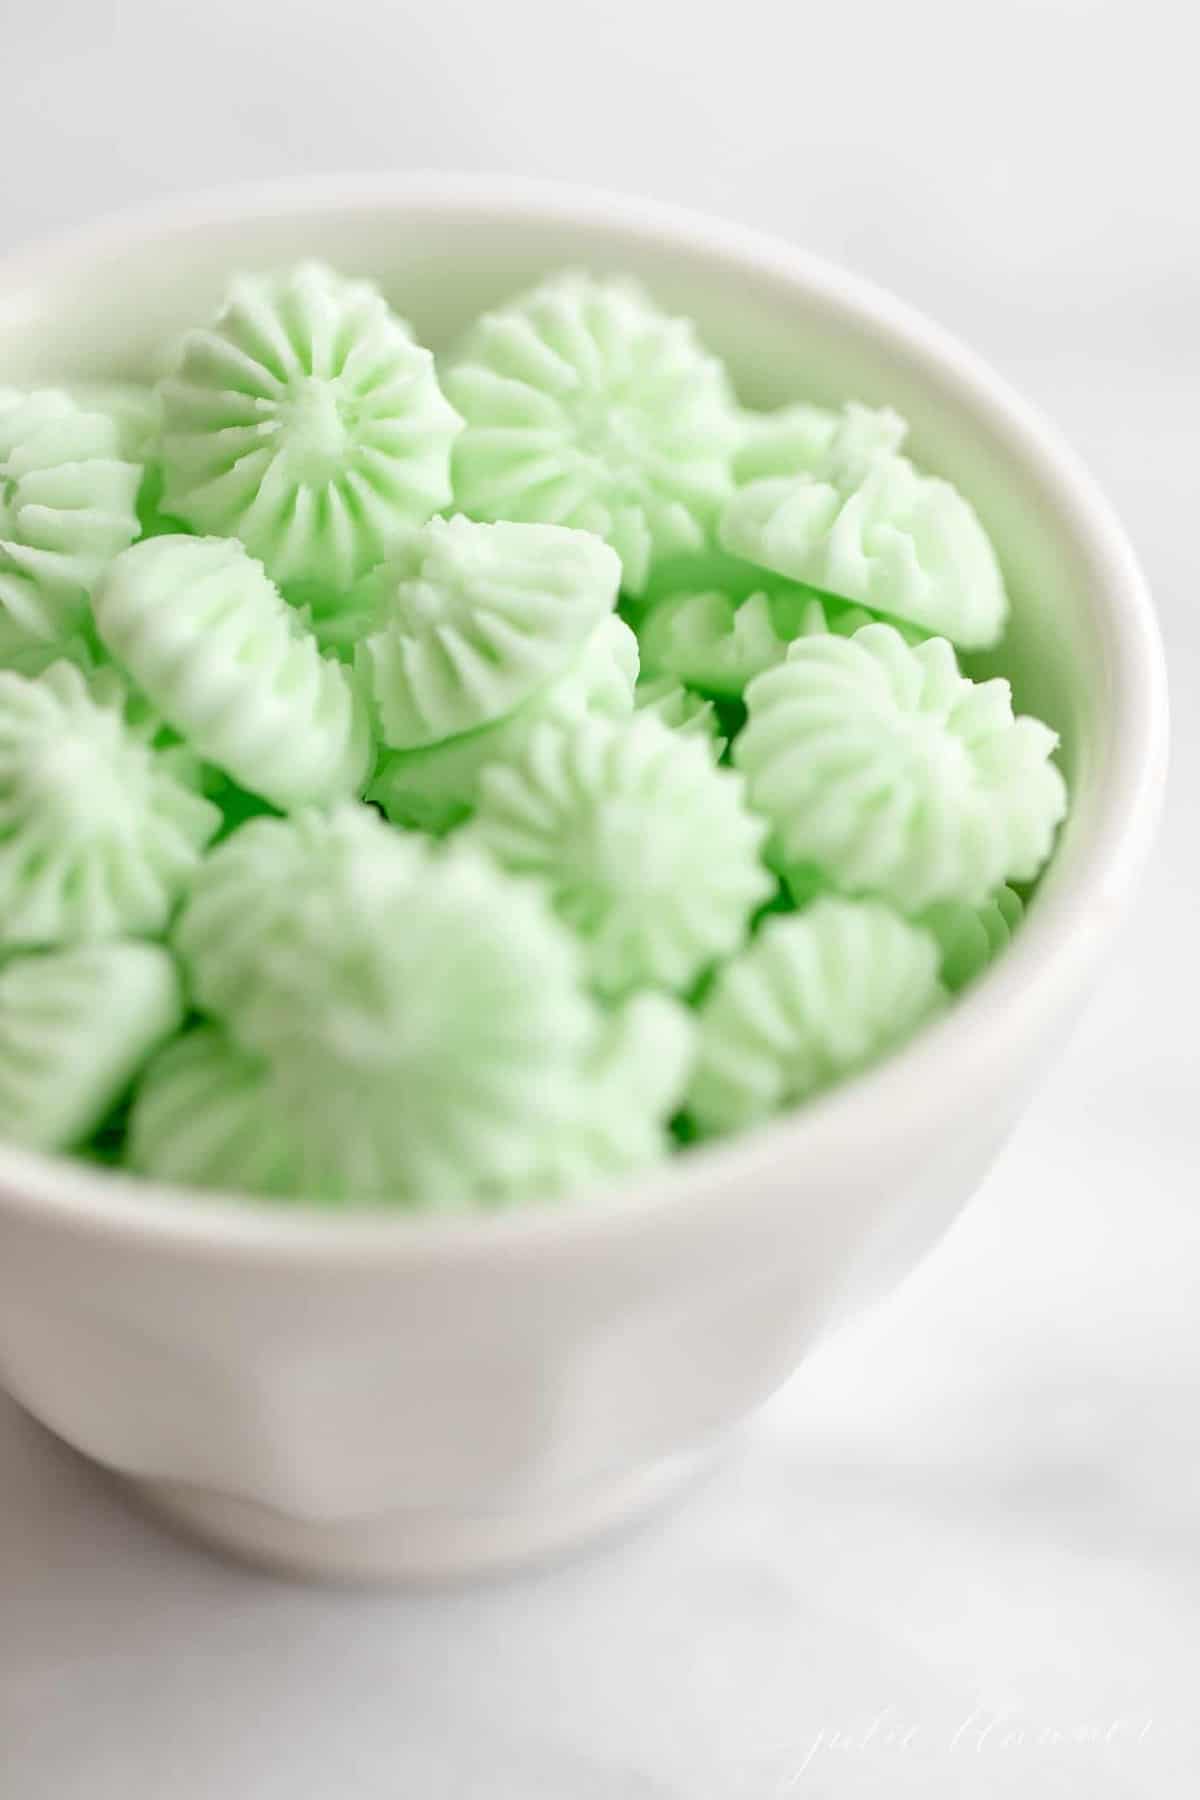 A bowl of green candies